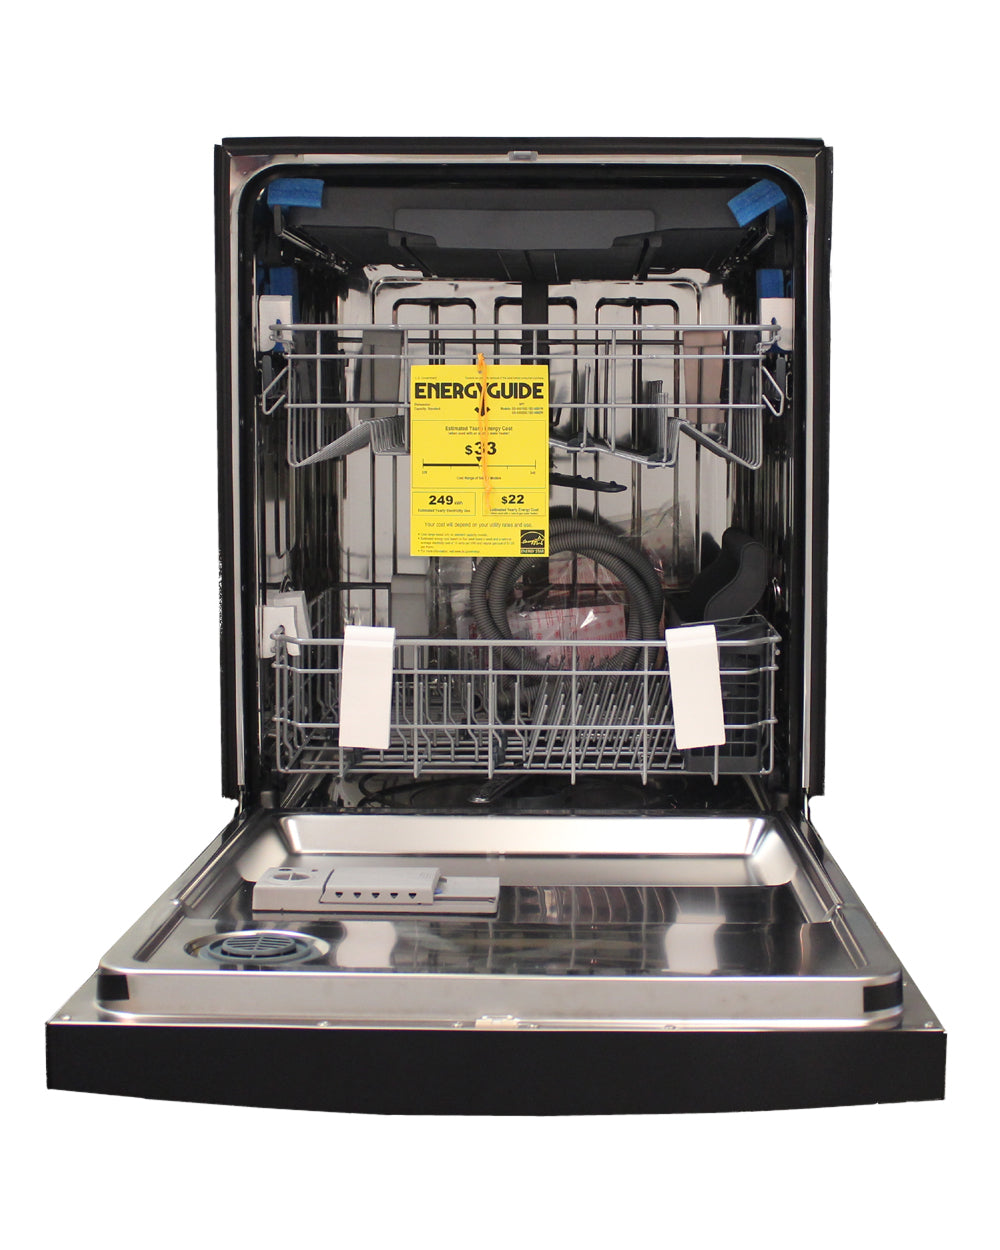 SPT Energy Star 24″ Built-In Dishwasher w/ Heated Drying – Stainless